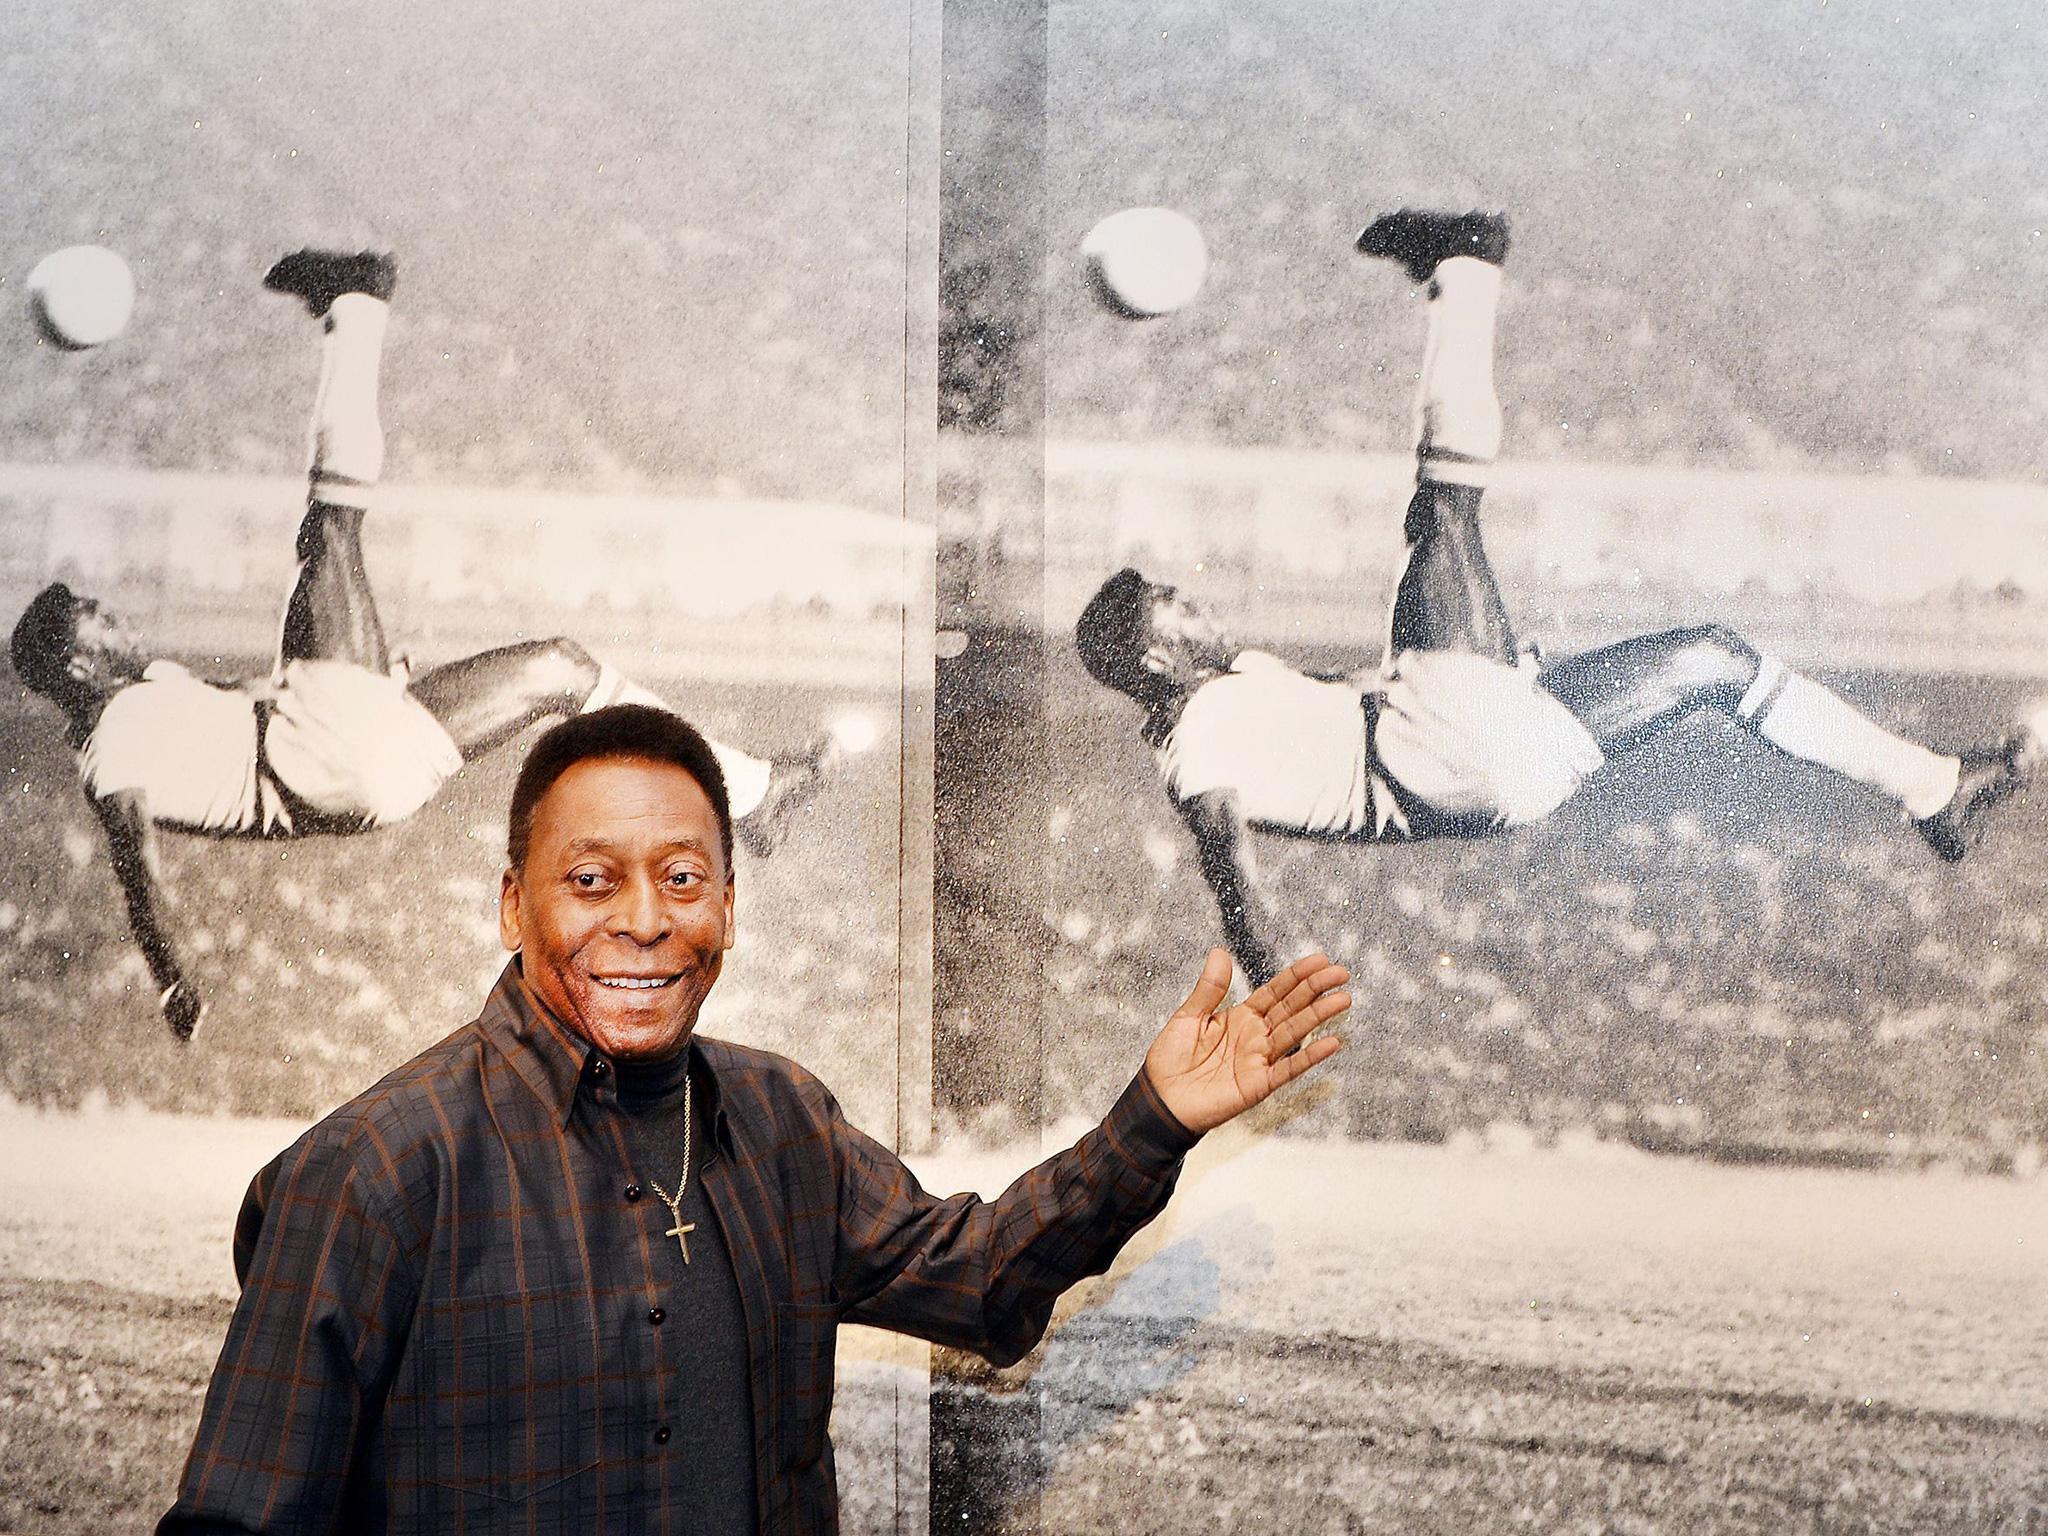 Pele was paid £120,000 by Puma to delay the kick-off of the 1970 World Cup final so that his boots were noticed